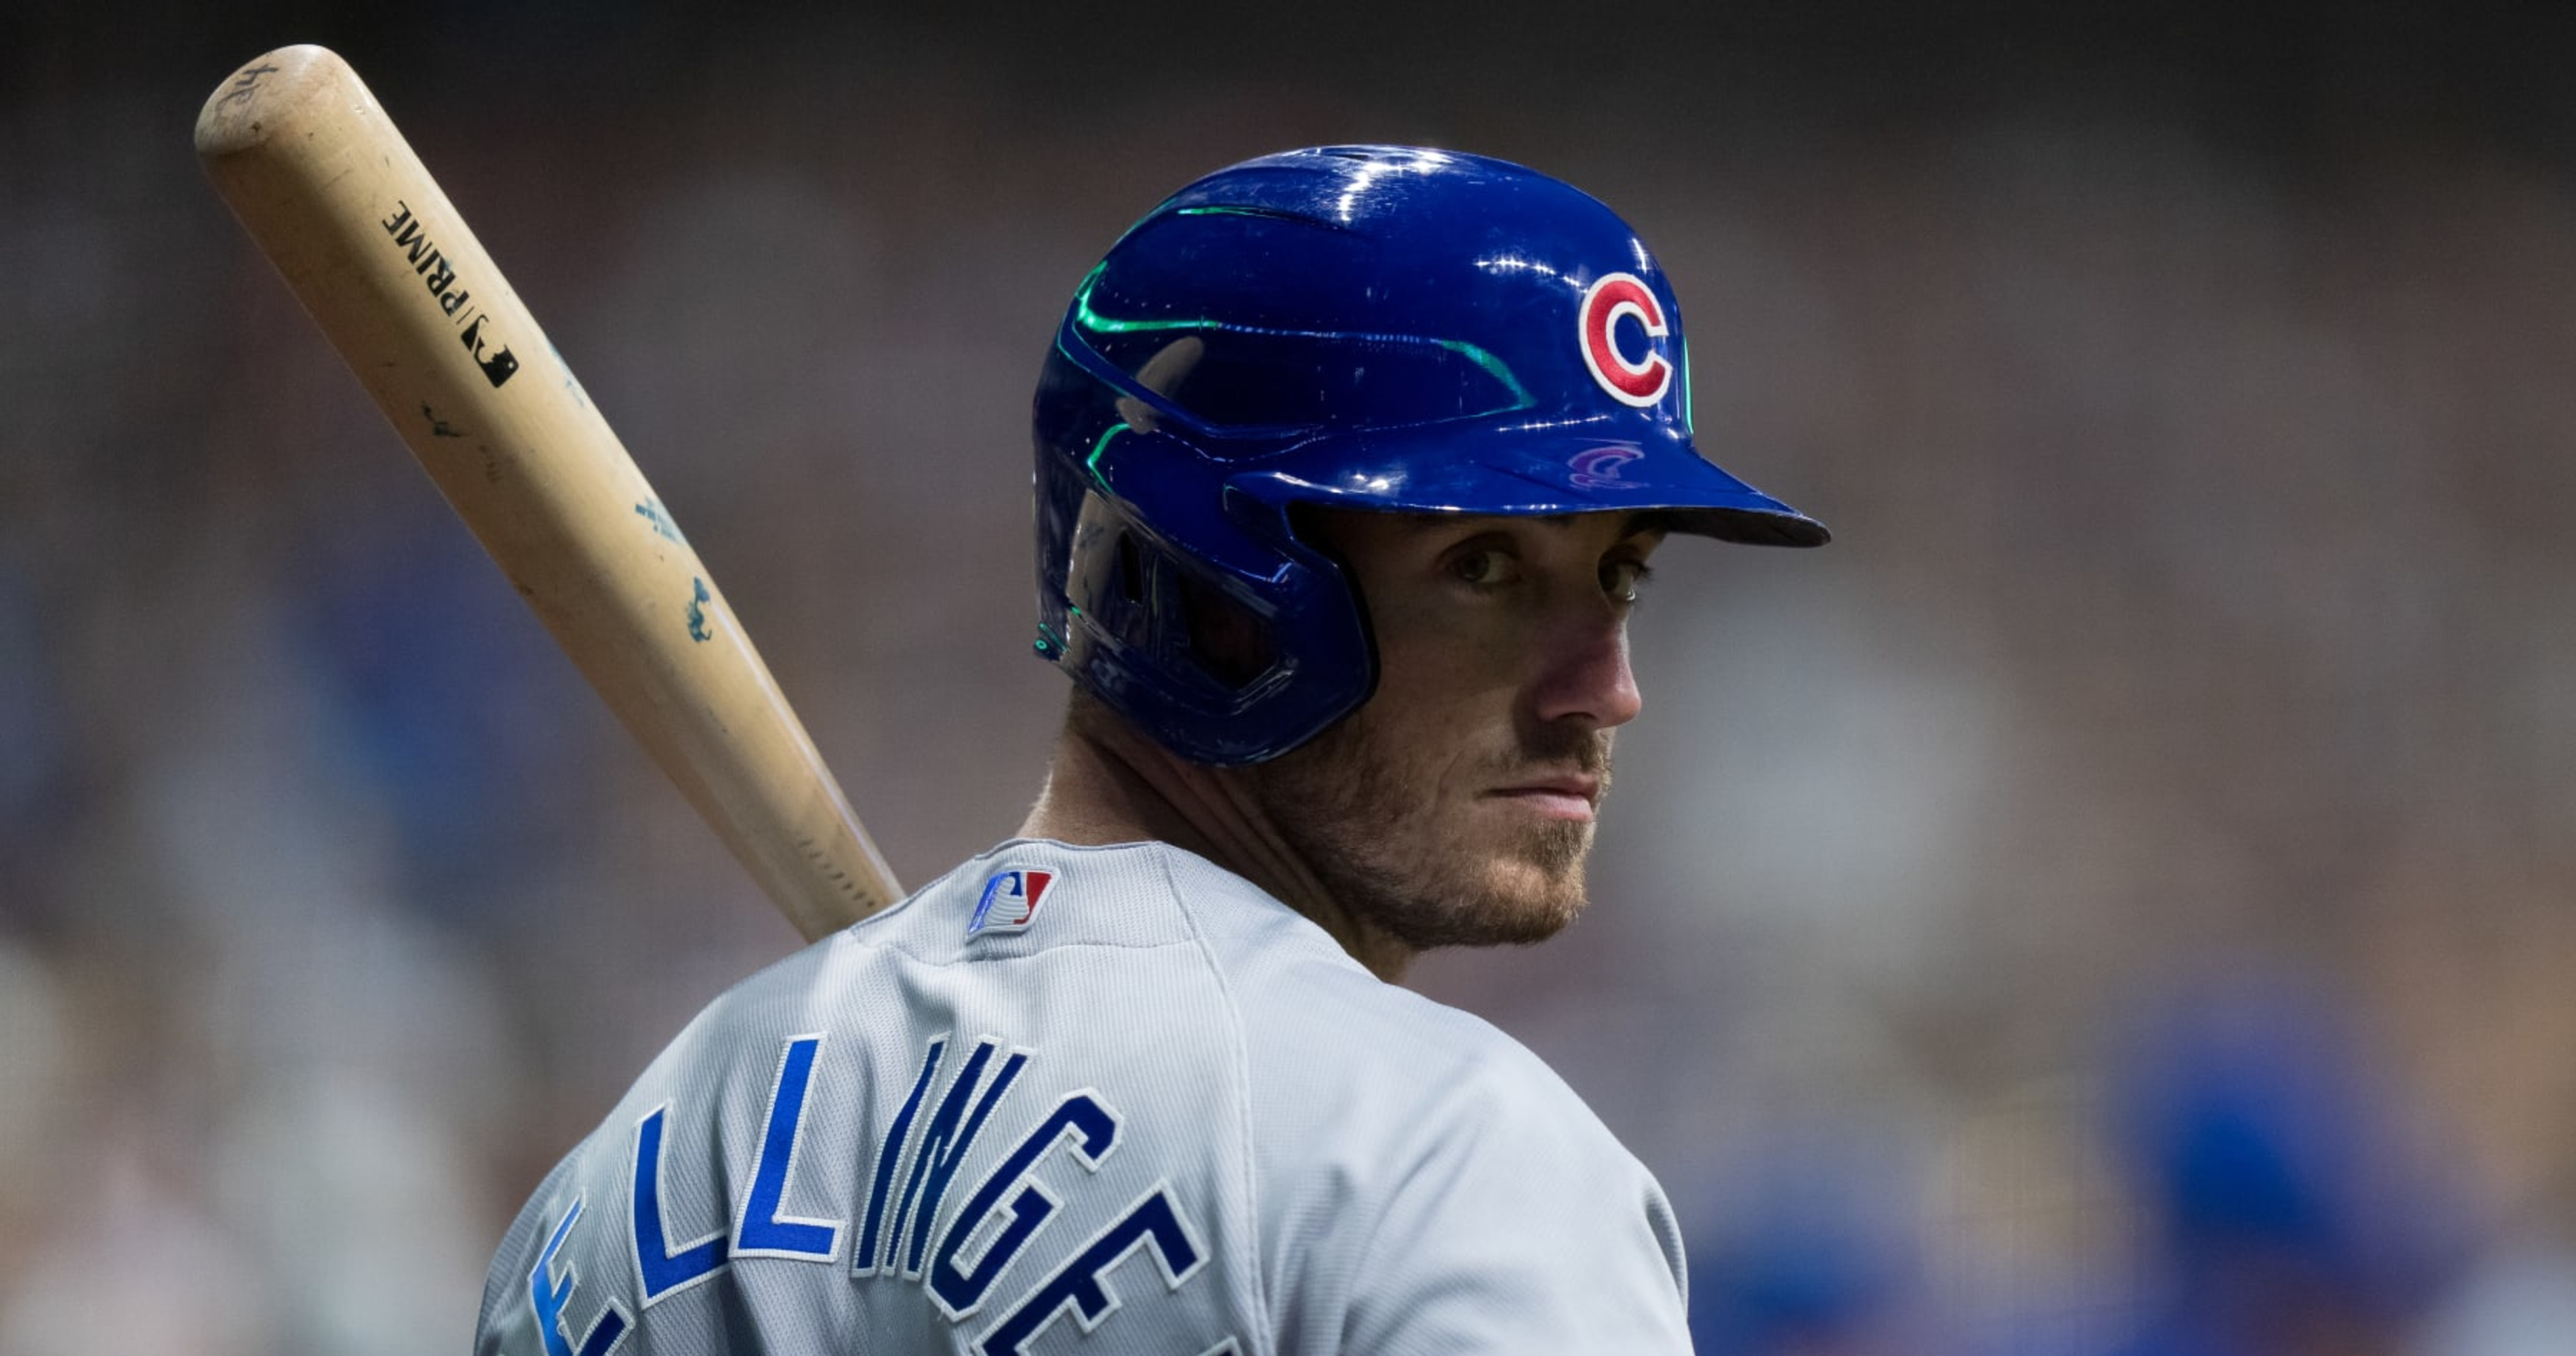 Ranking the Top 5 Landing Spots for Anthony Rizzo in MLB Free